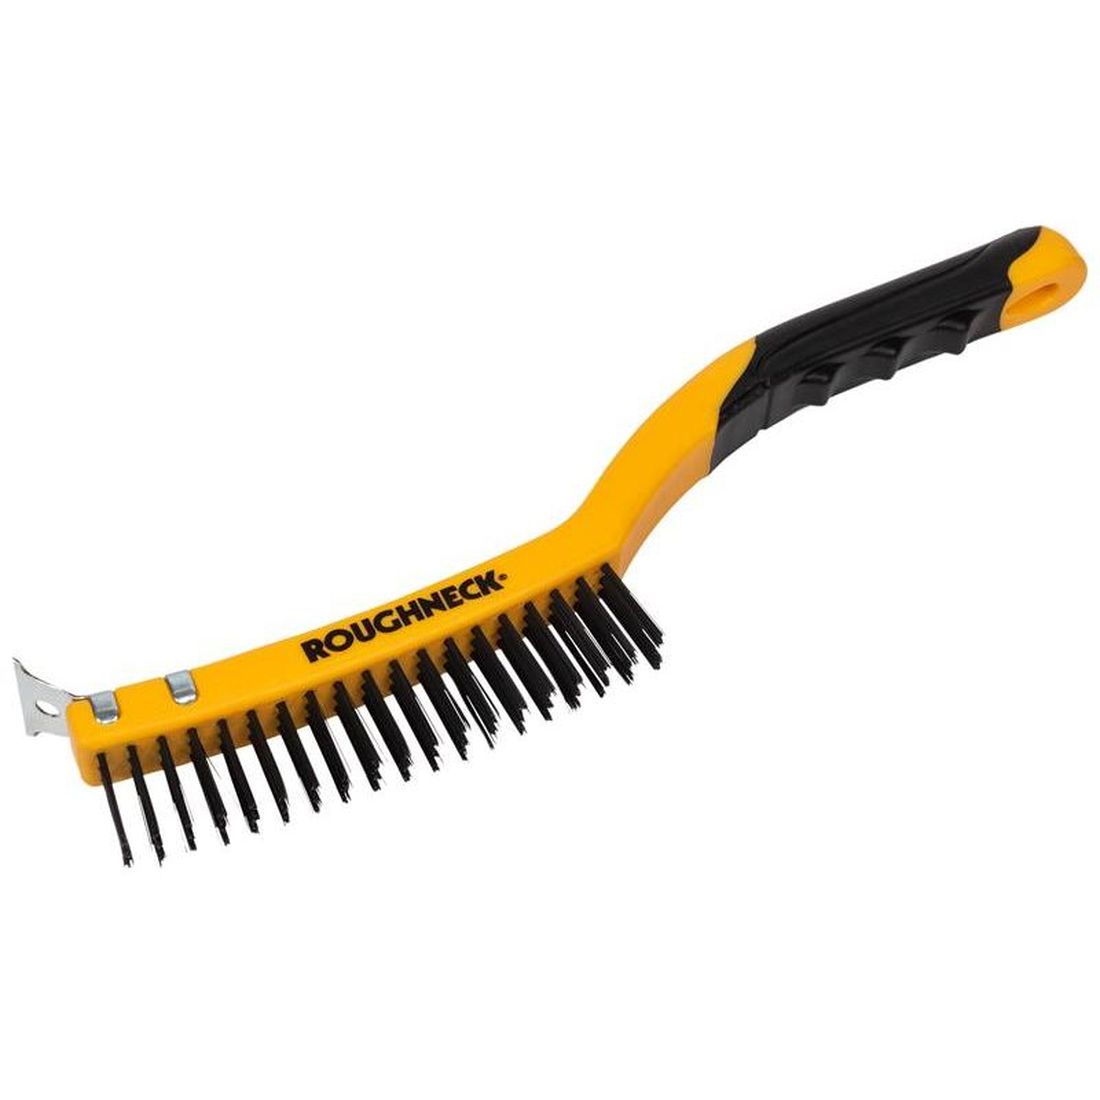 Roughneck Carbon Steel Wire Brush Soft Grip with Scraper 355mm (14in) - 3 Row             